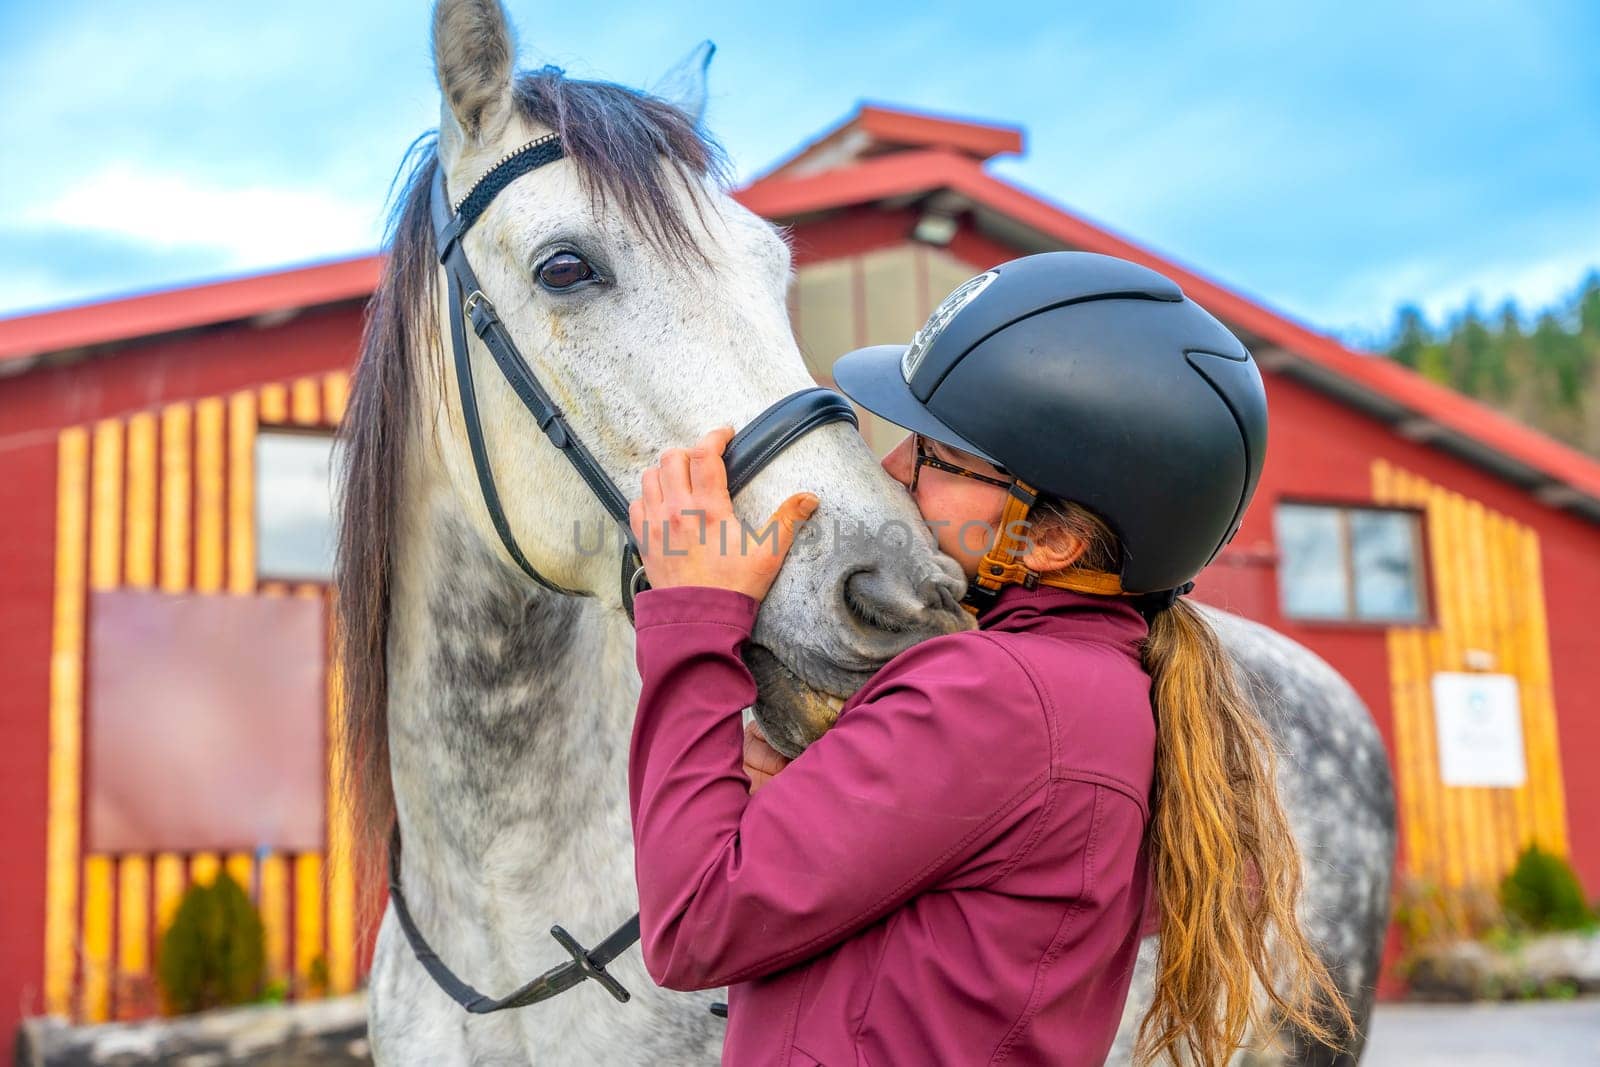 Woman kissing a horse outside an equestrian center by Huizi